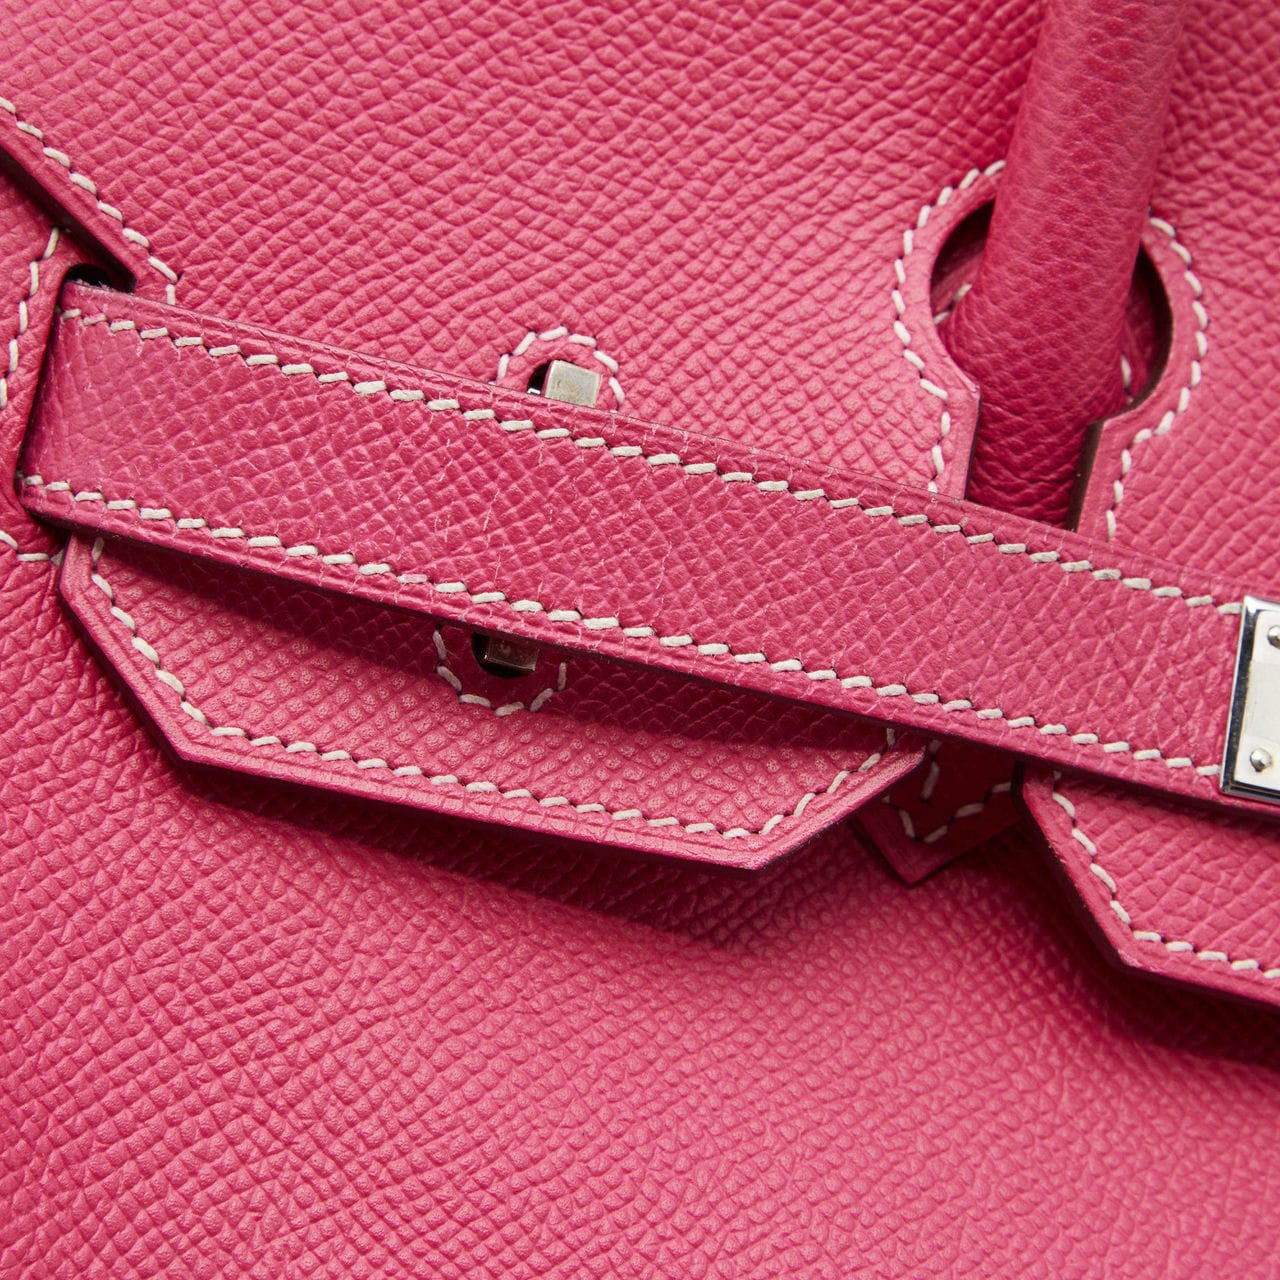 What Are the Hallmarks of a Well-Made Purse? | Luxury Purse Brand